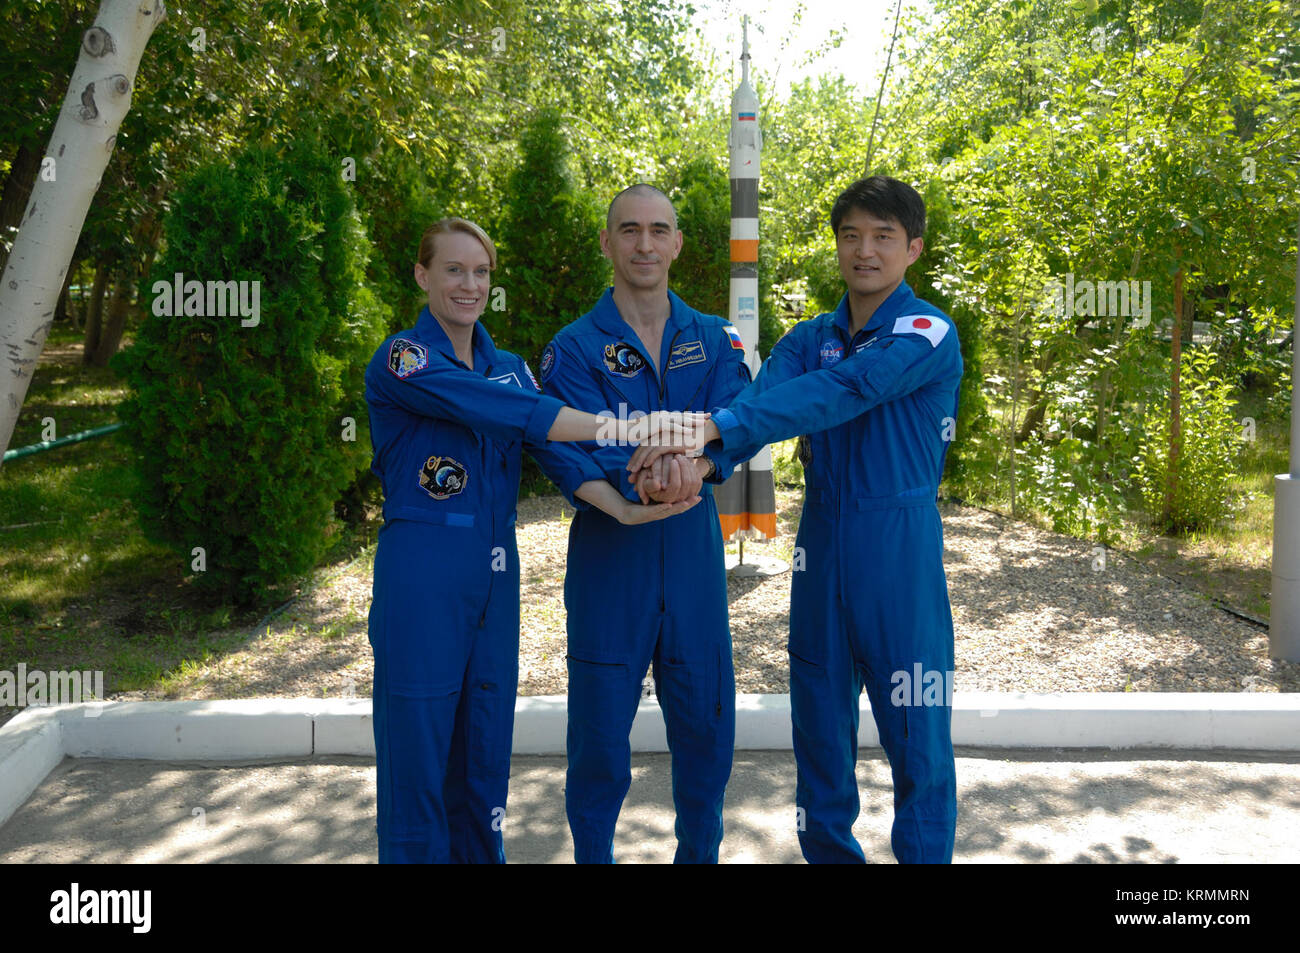 At the Cosmonaut Hotel in Baikonur, Kazakhstan, Expedition 48-49 crewmembers Kate Rubins of NASA (left), Anatoly Ivanishin of Roscosmos (center) and Takuya Onishi of the Japan Aerospace Exploration Agency (right) pose for pictures June 30 during traditional pre-launch activities. Rubins, Ivanishin and Onishi will launch July 7, Baikonur time, on the Soyuz MS-01 spacecraft for a planned four-month mission on the International Space Station.  NASA/Alexander Vysotsky Soyuz MS-01 crew in front of a Soyuz rocket statue Stock Photo